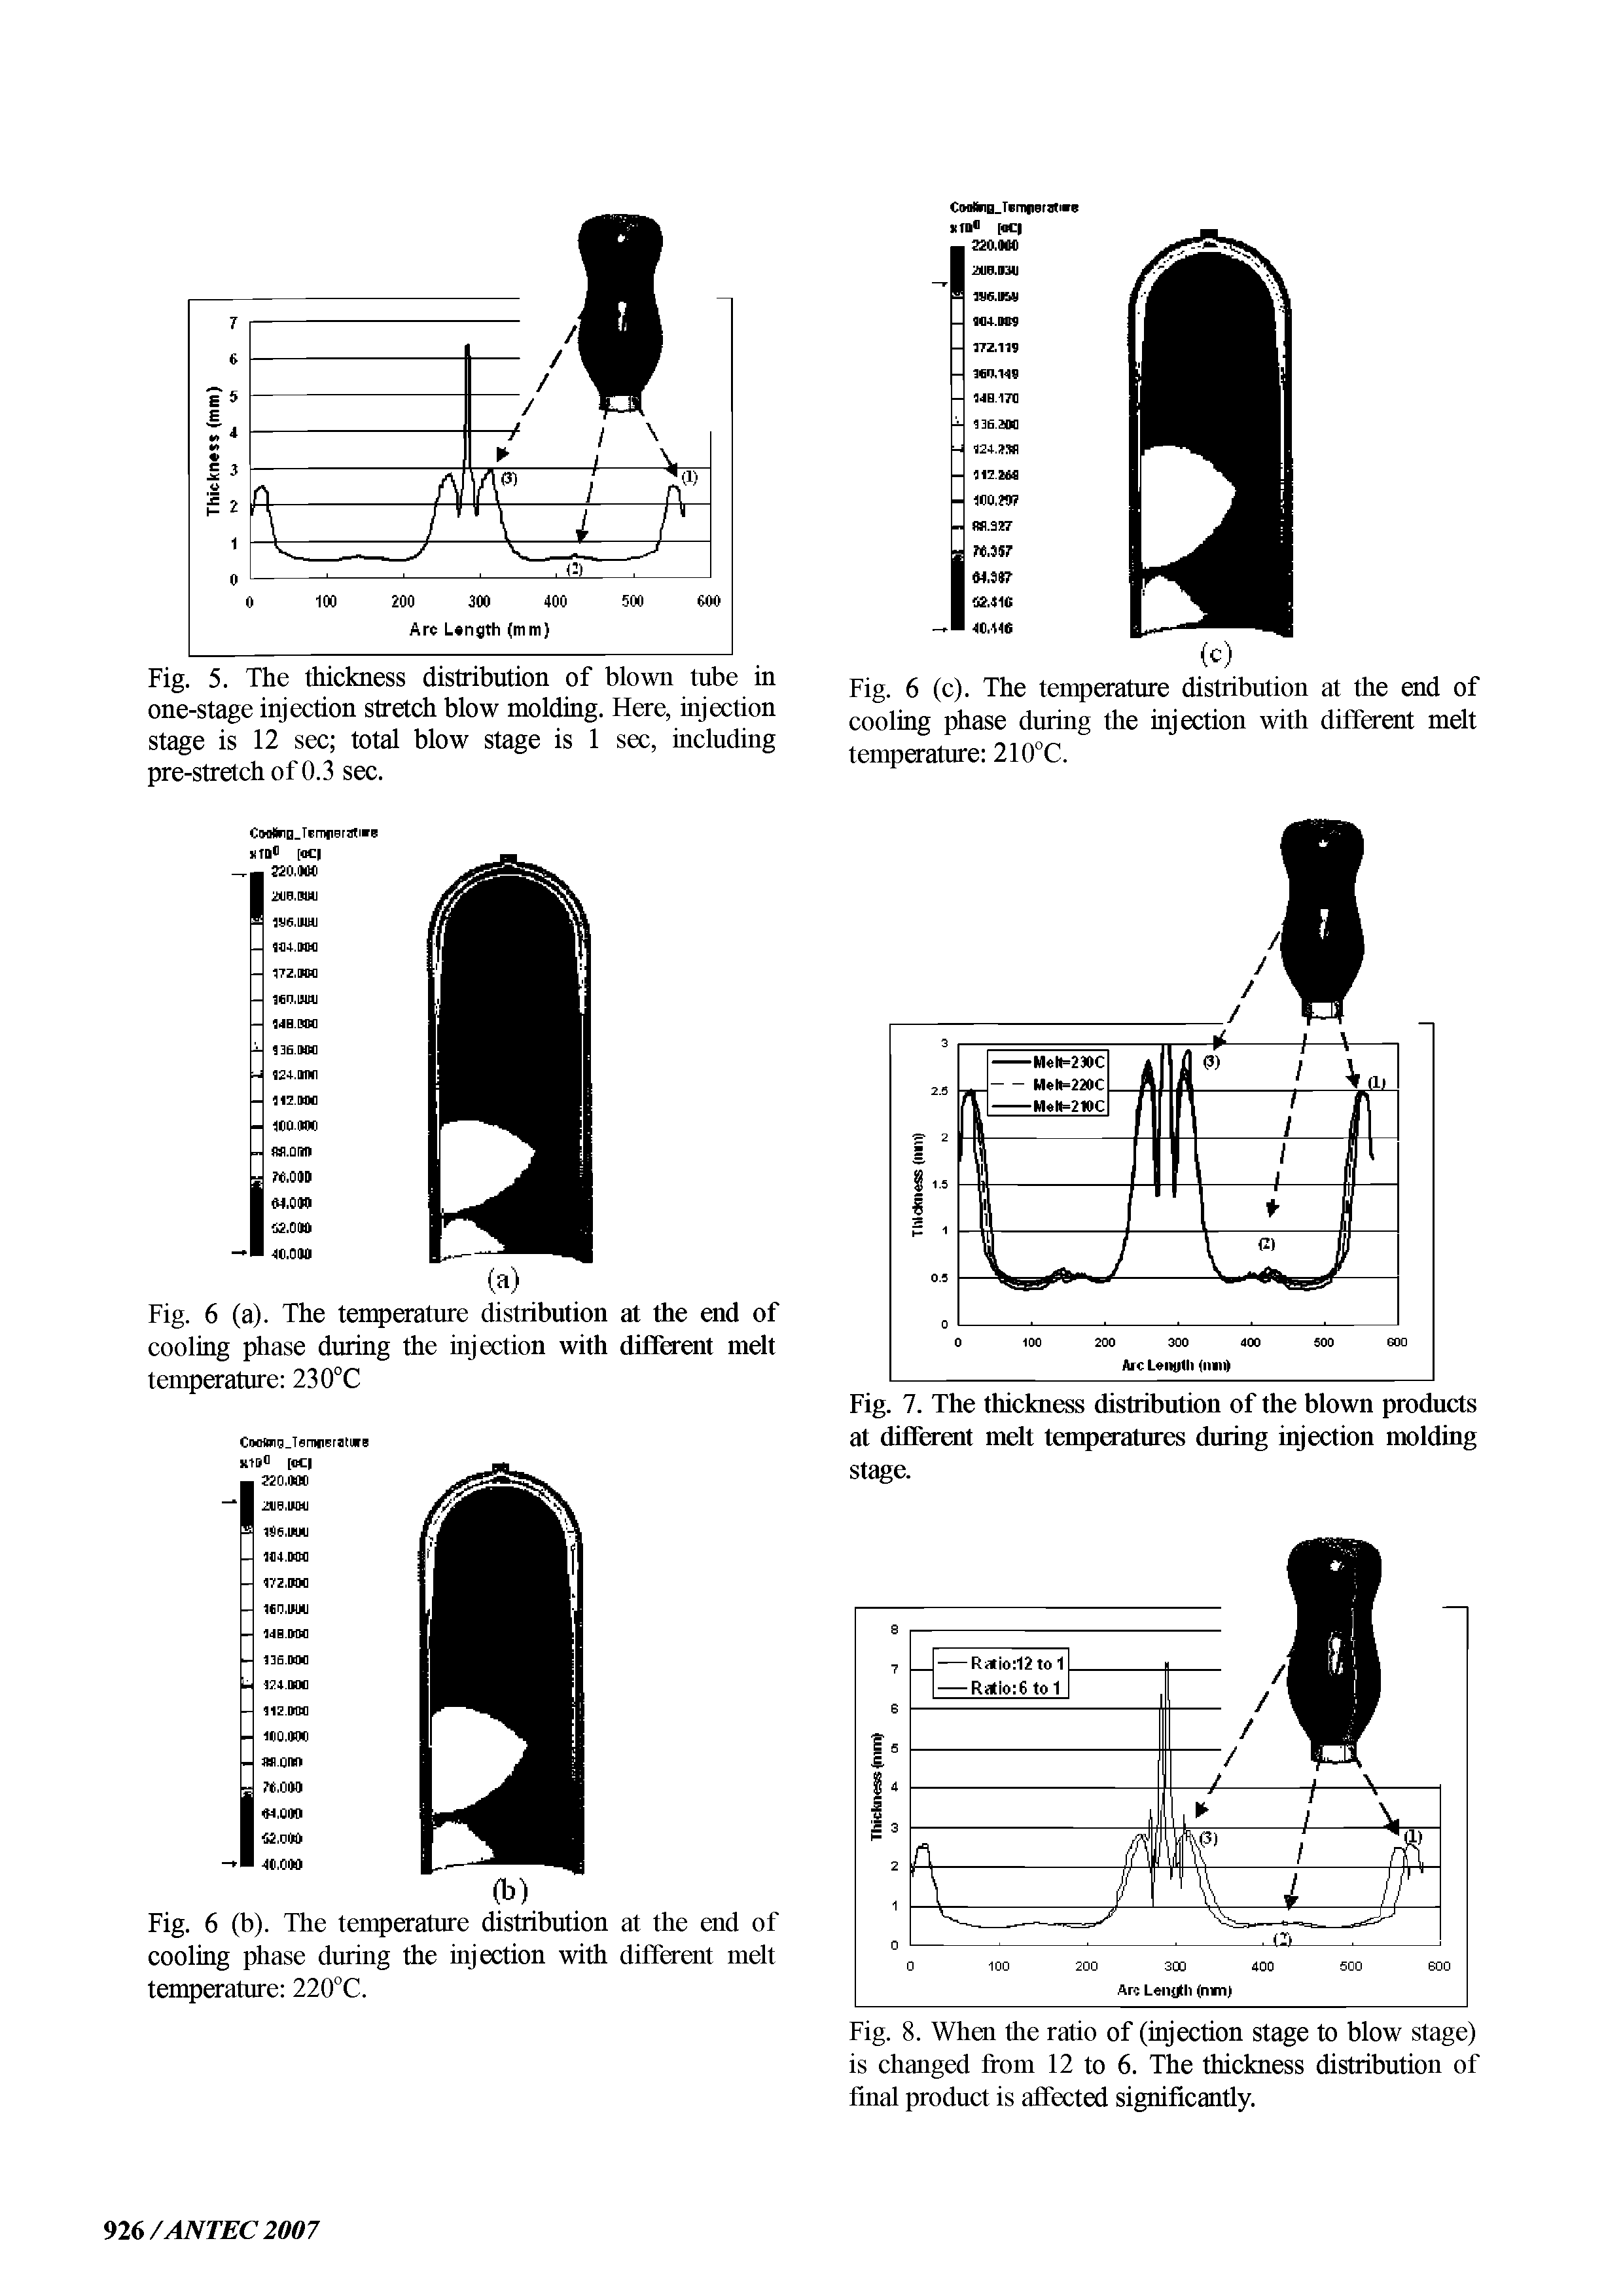 Fig. 7. The thickness distribution of the blown prodncts at different melt tempaatures during injection molding stage.